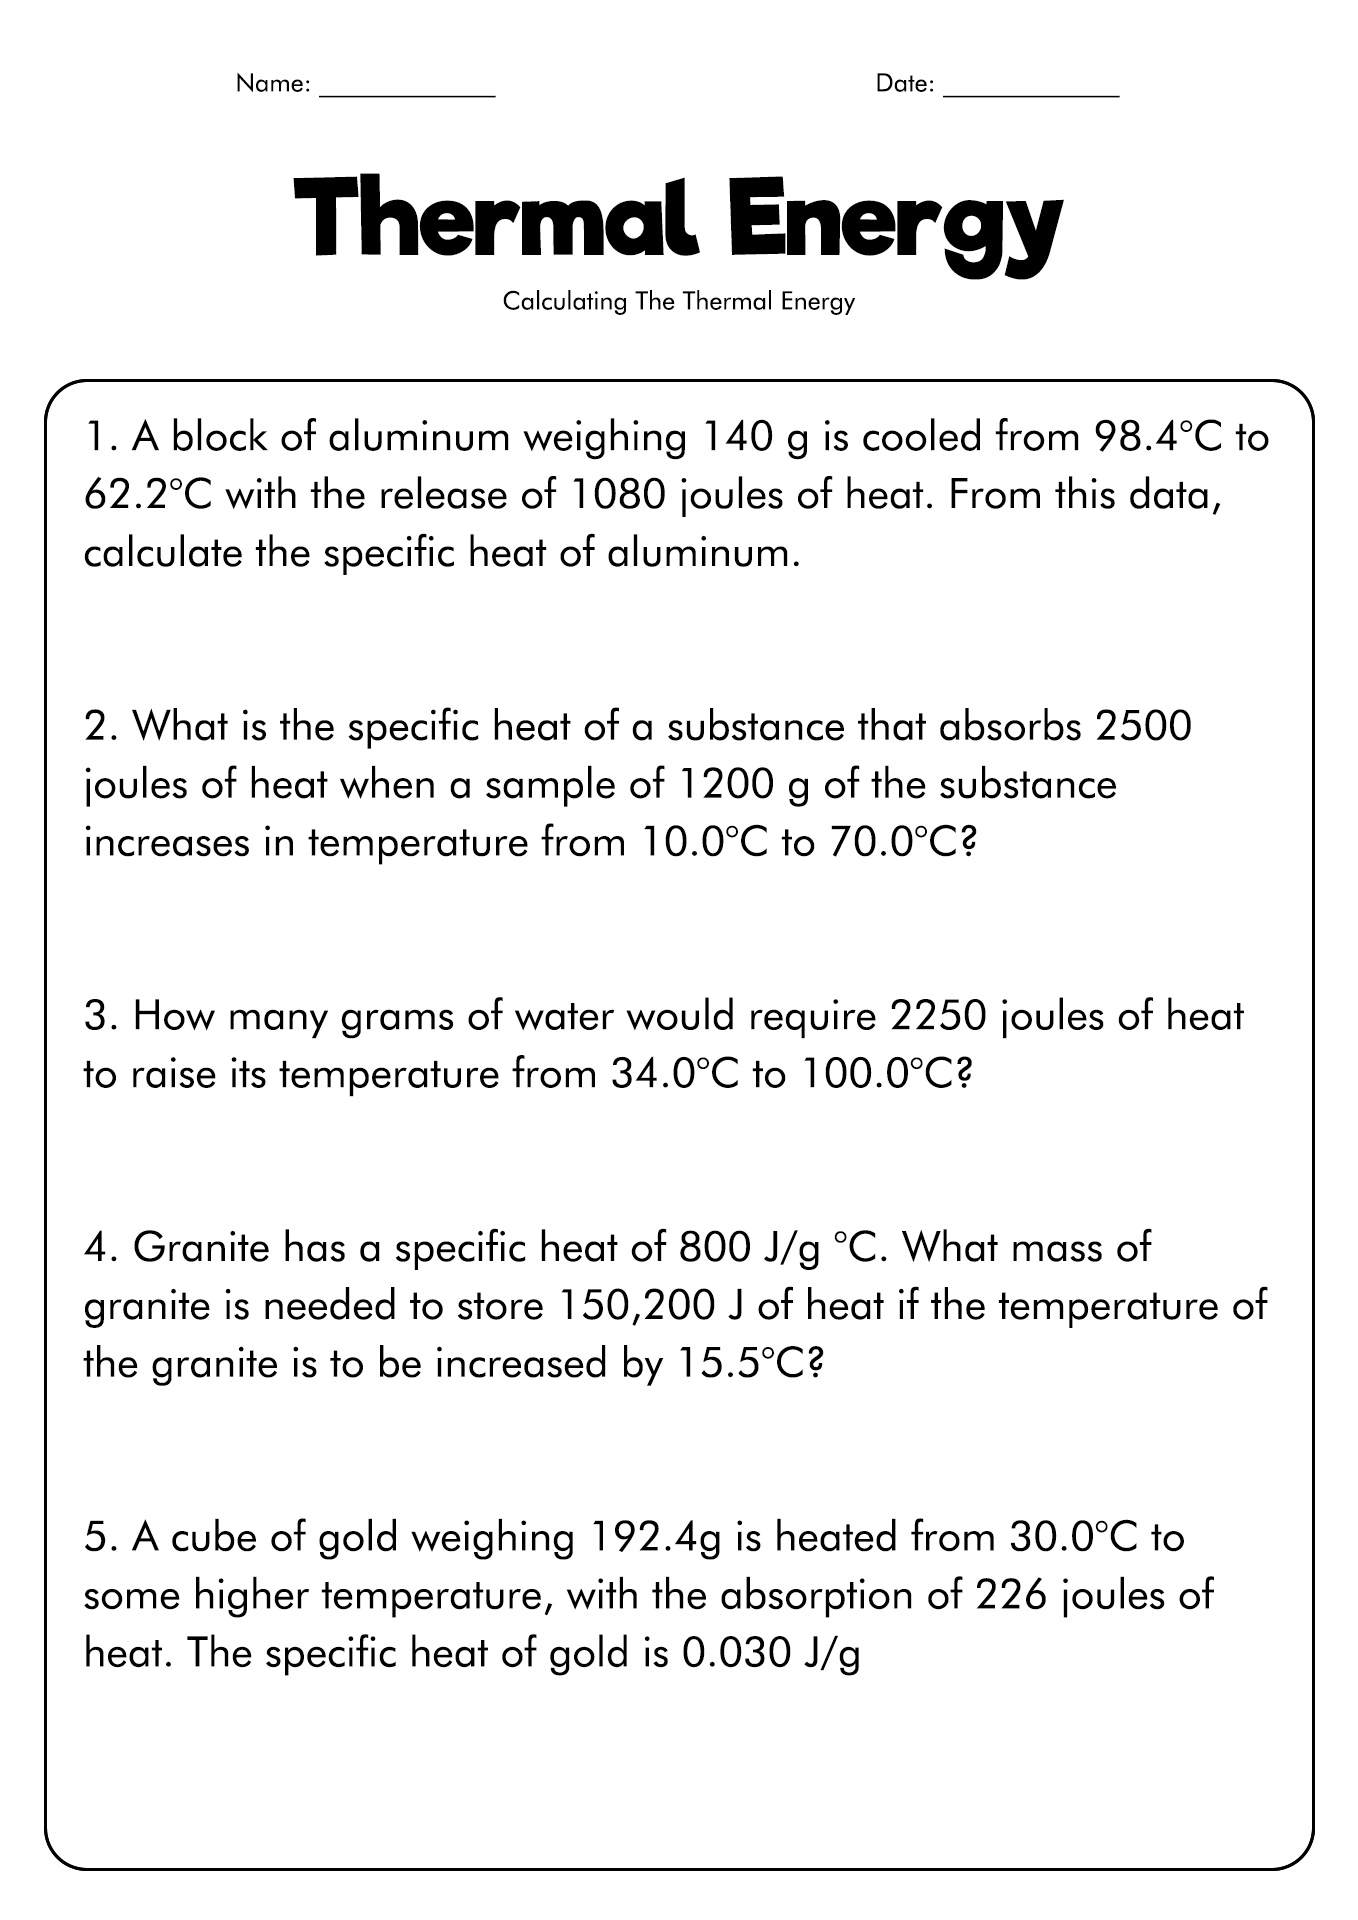 Thermal Energy Worksheet Heat and Temperature Image